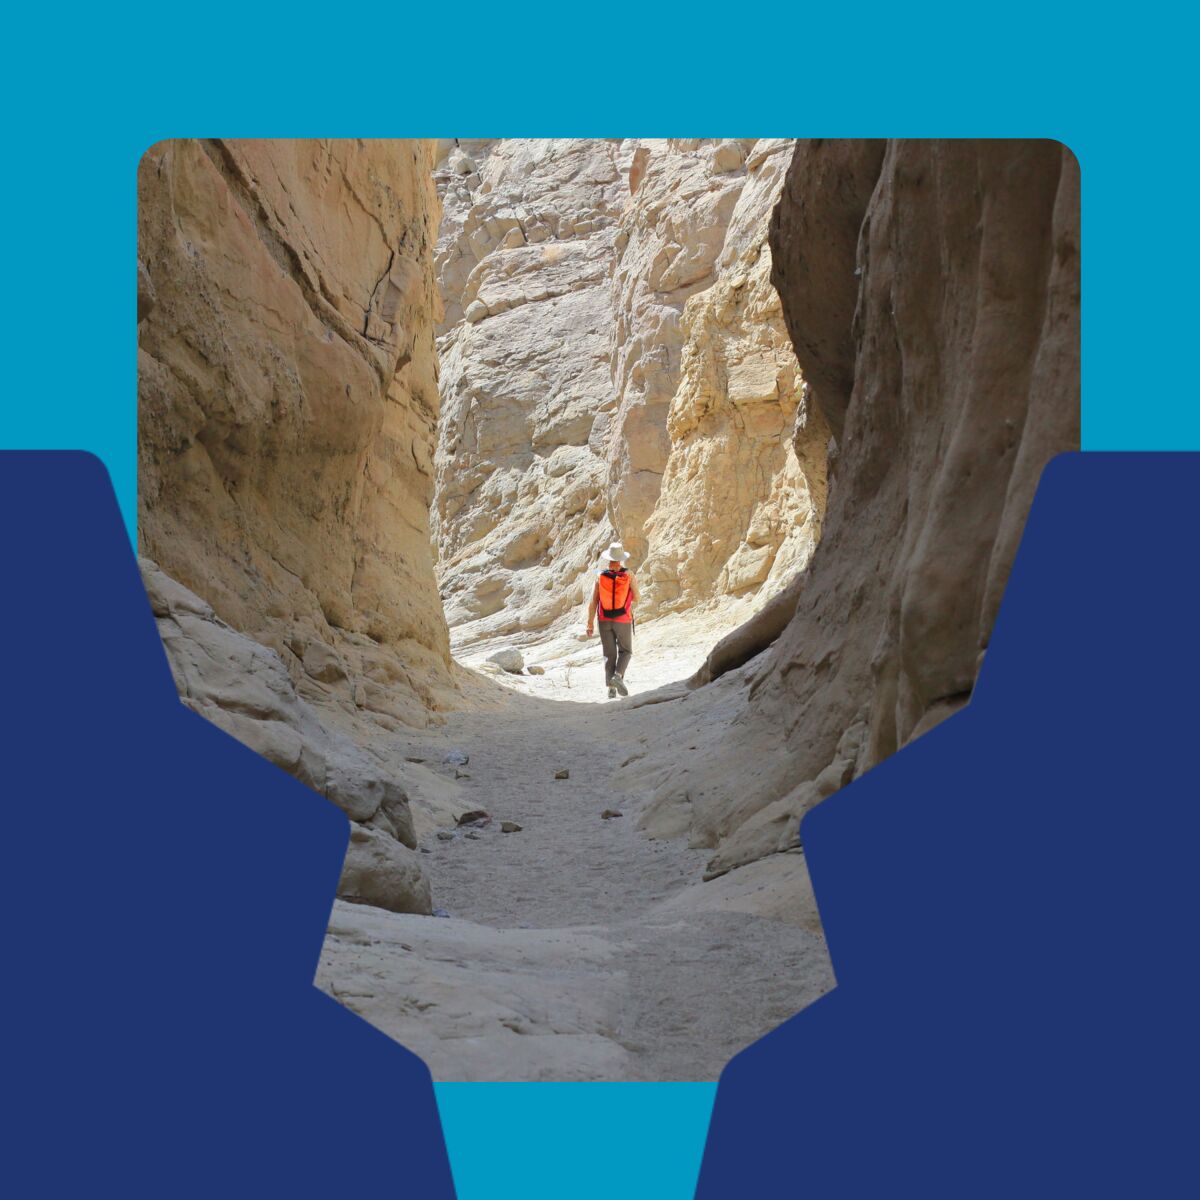 A photo of someone walking through a canyon with an illustrated border